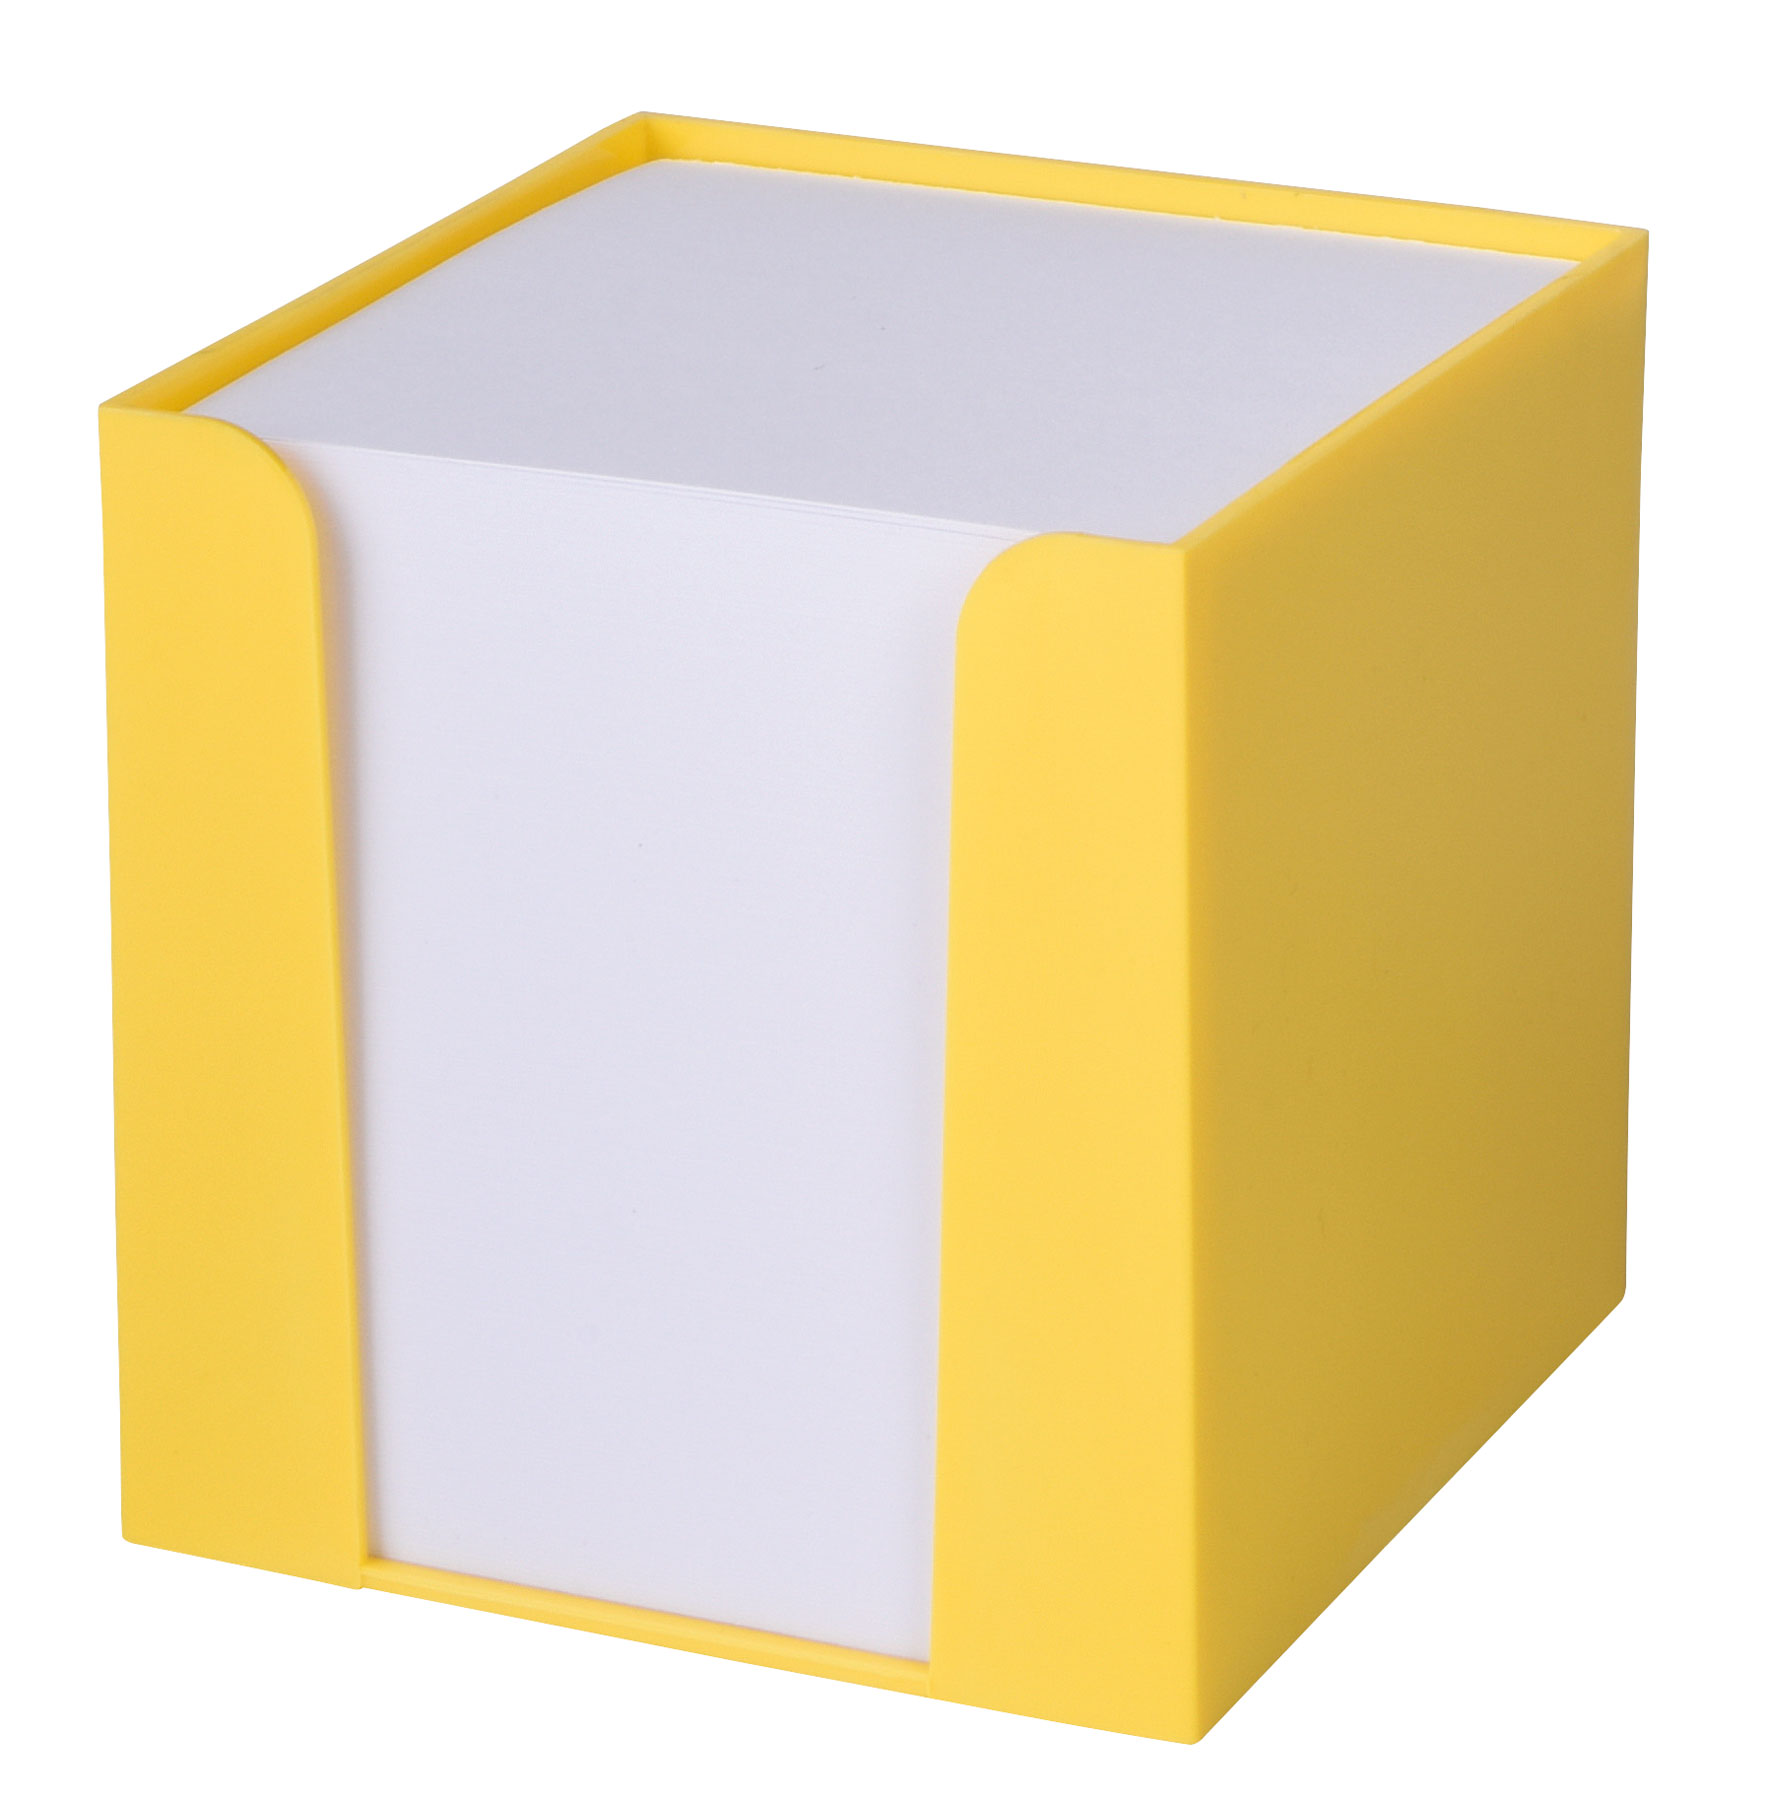 Memo cube NEVER FORGET - yellow